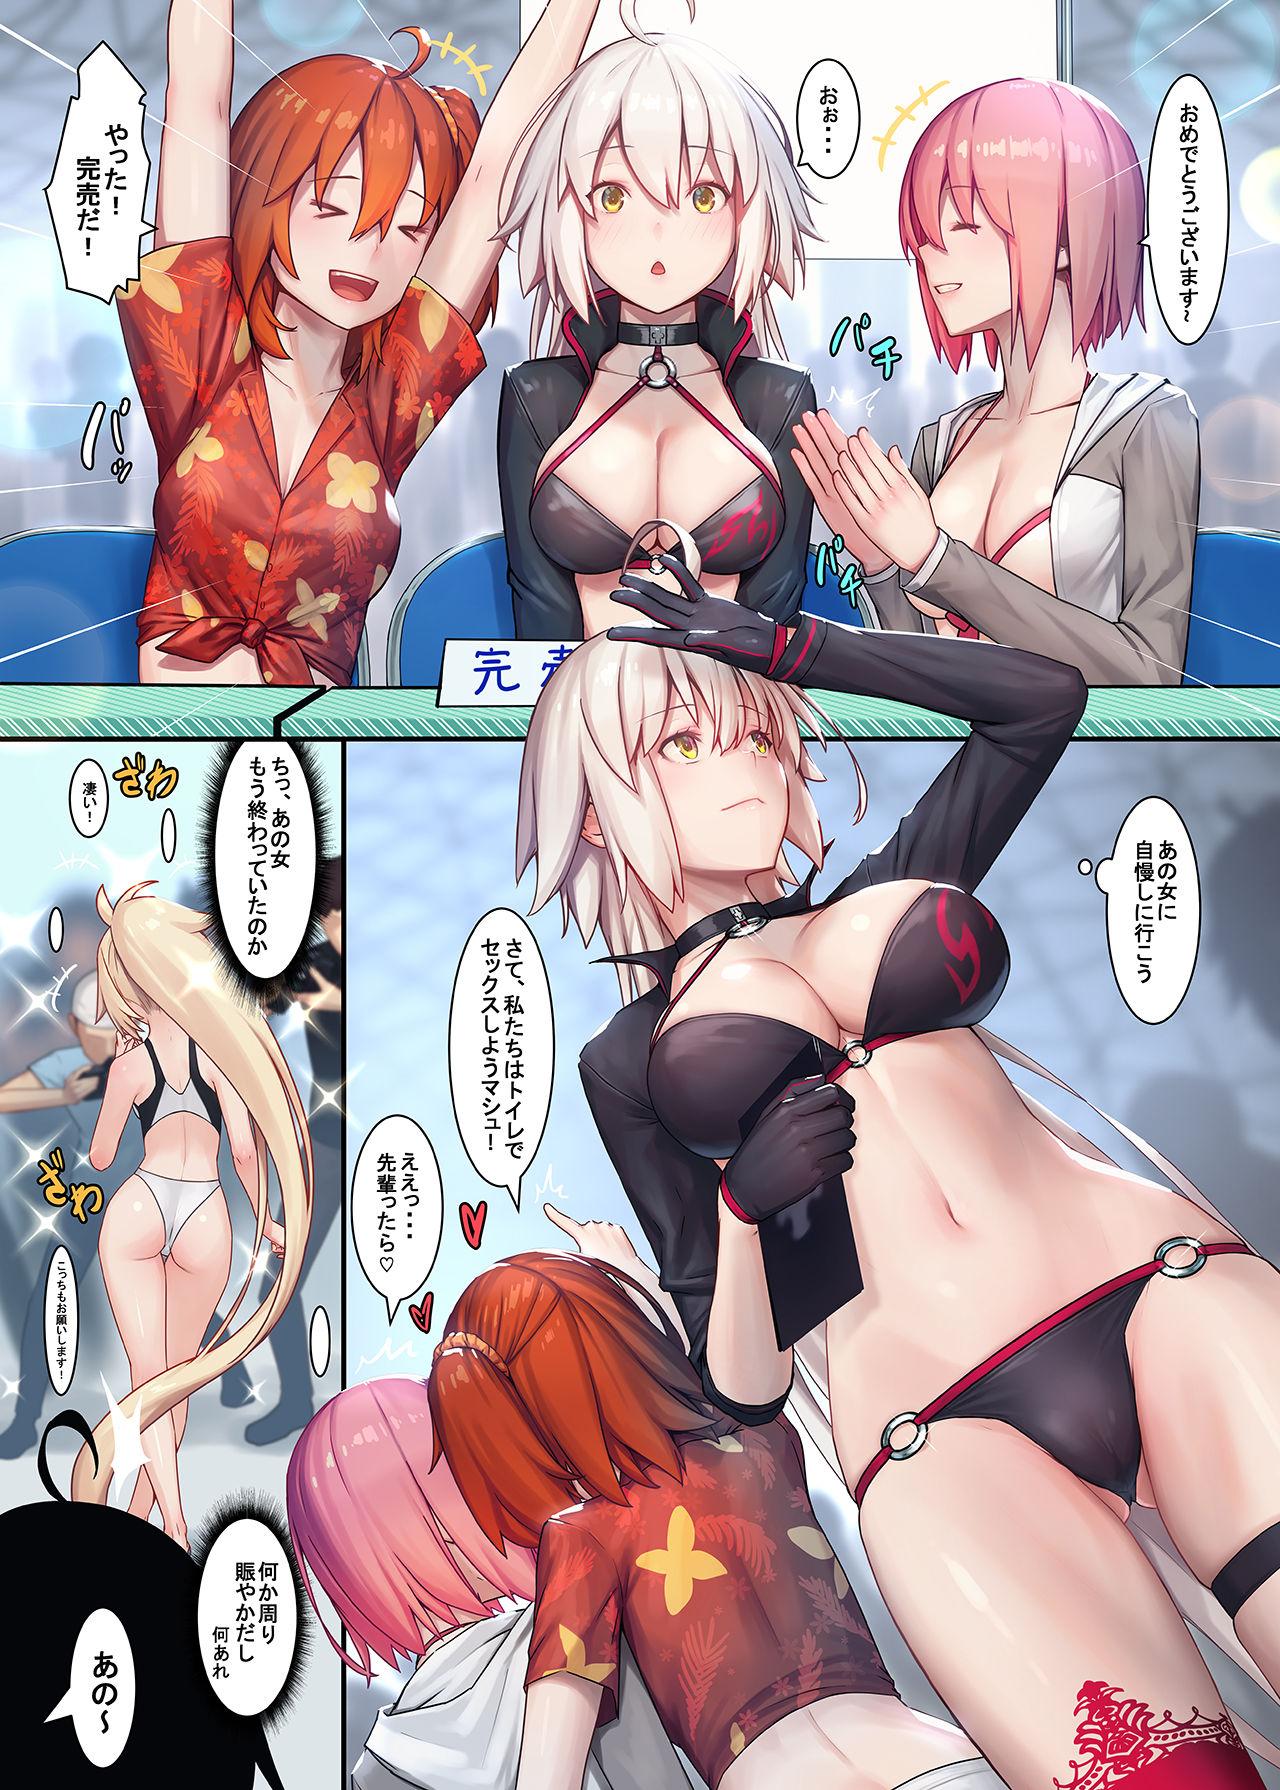 Mms Fate/Gentle Order 4 "Alter" - Fate grand order Hair - Page 3